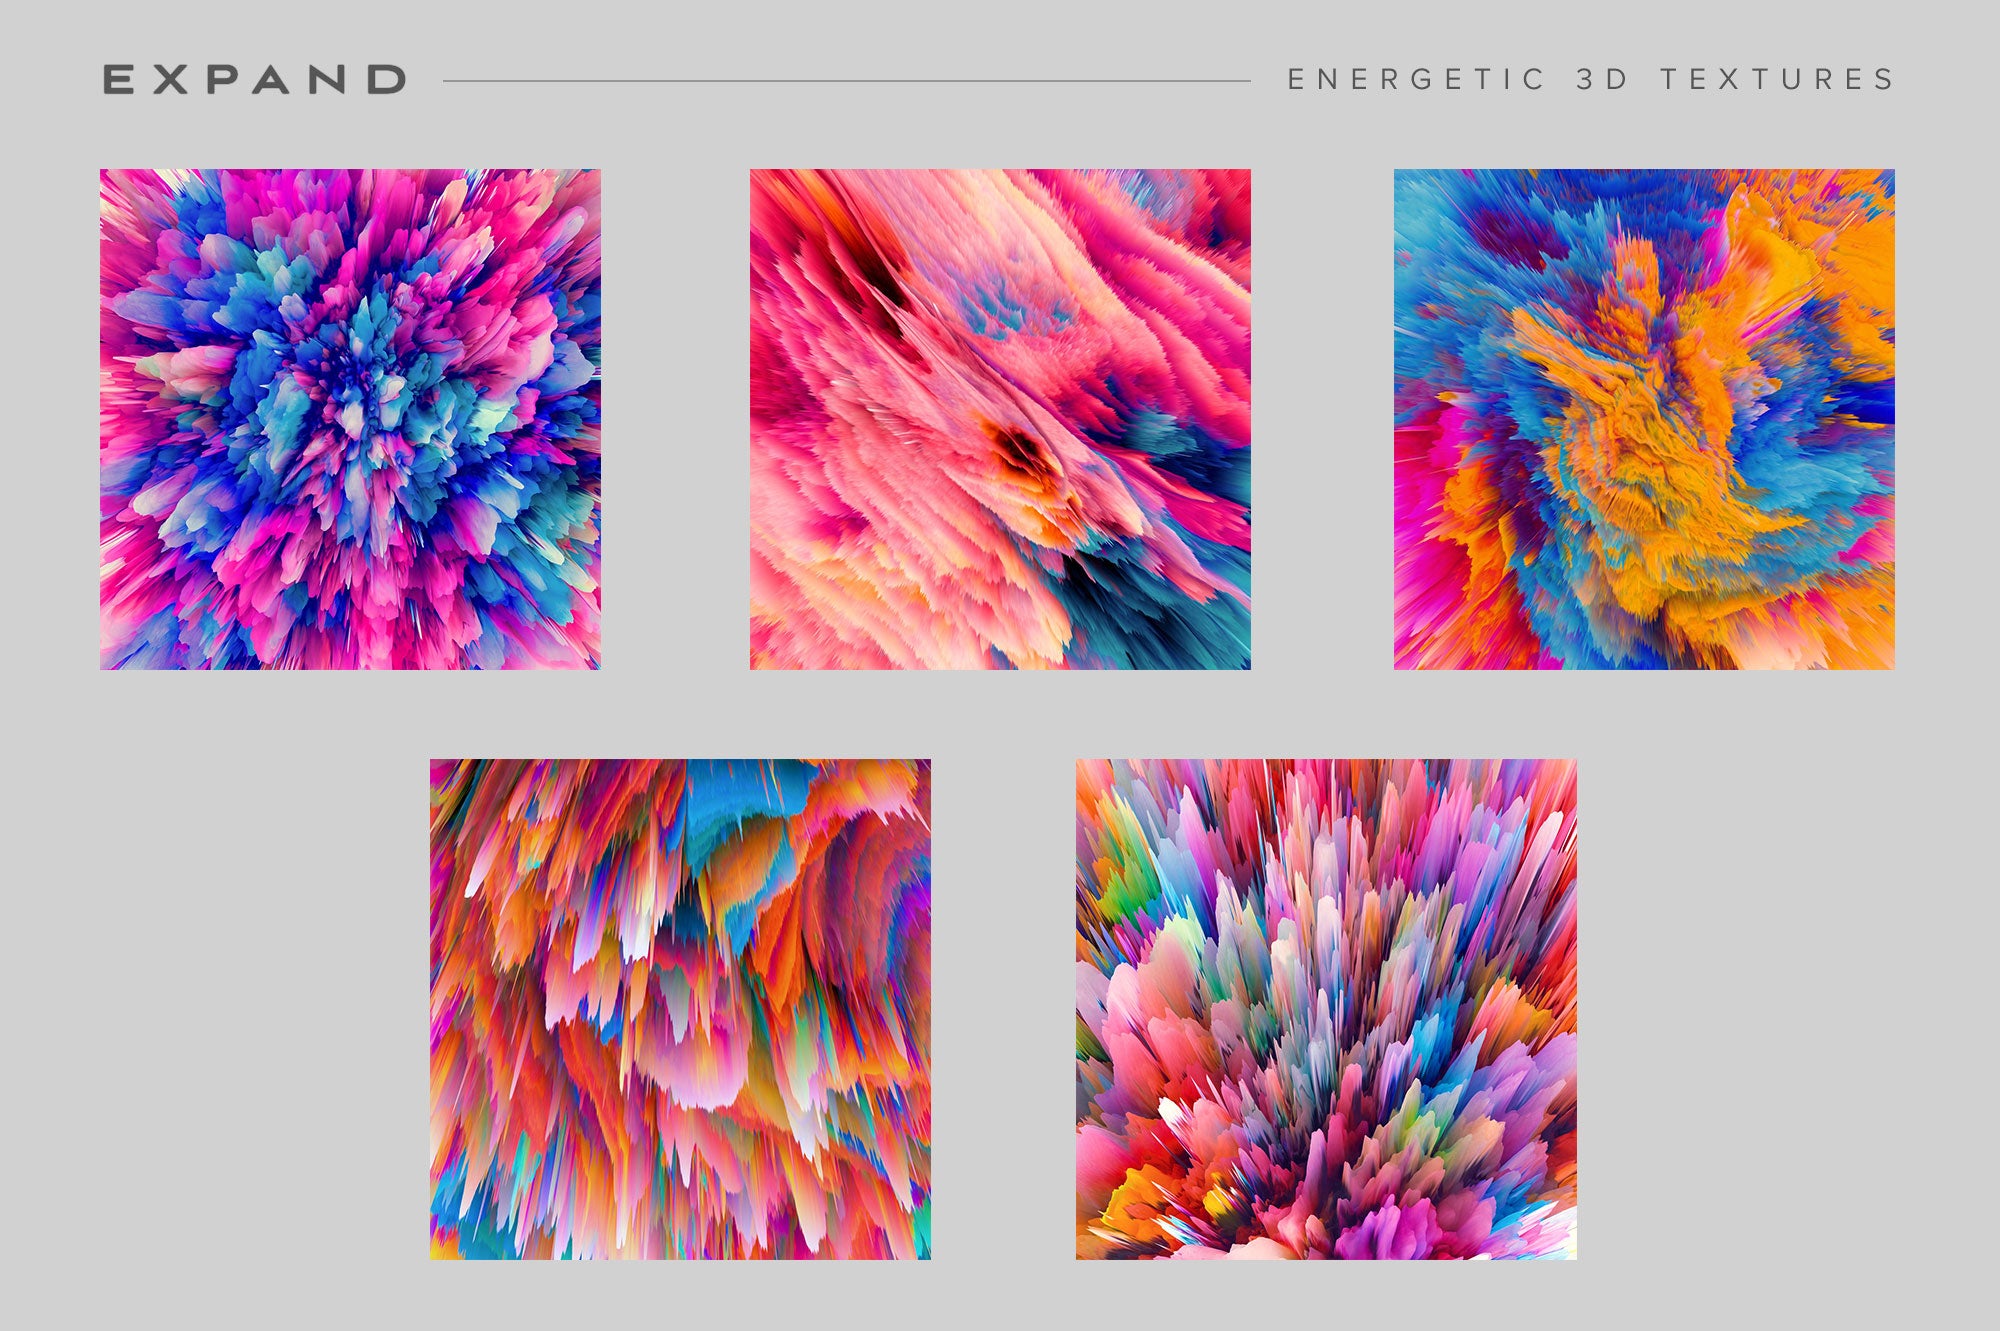 Expand: Energetic 3D Textures